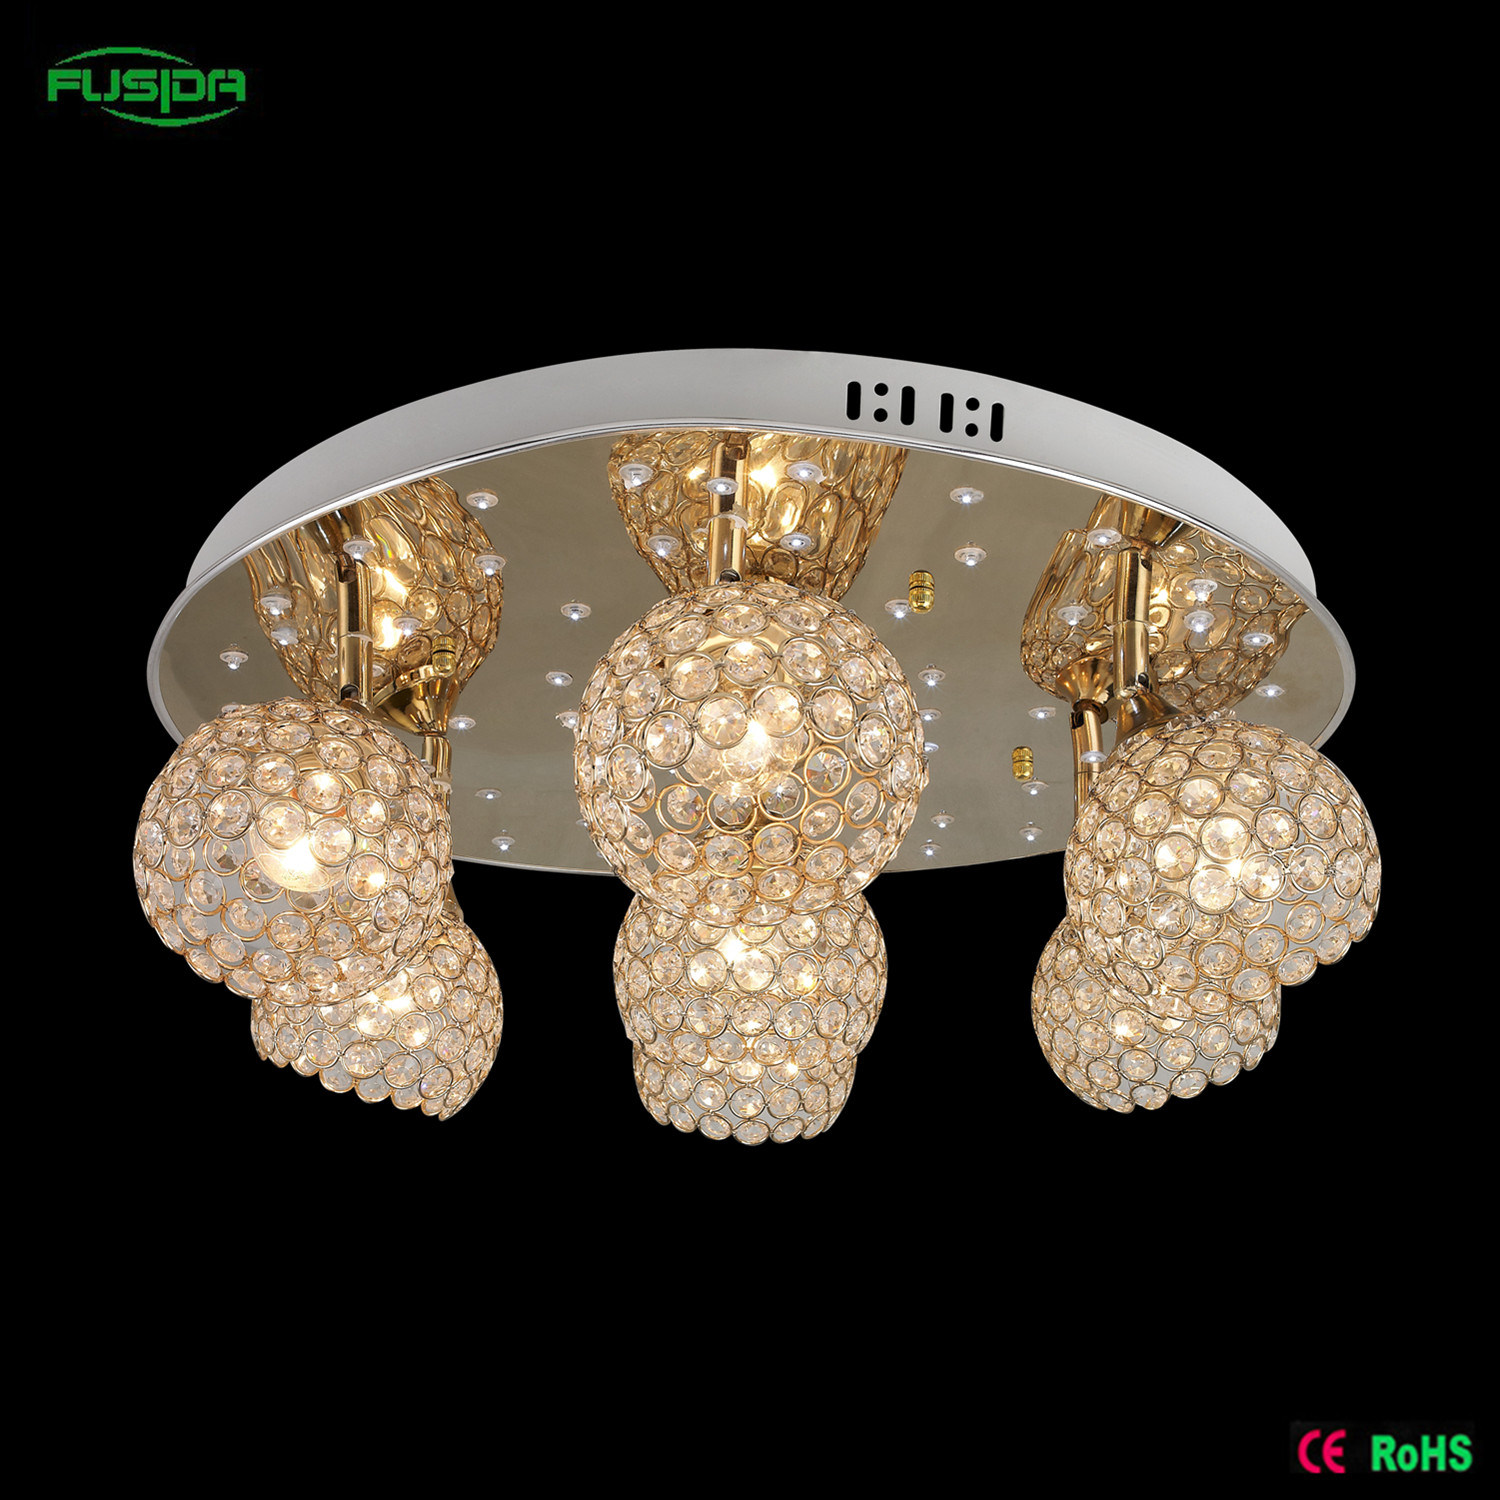 Modern Ceiling Chandelier Light with LED (C-9460/7)